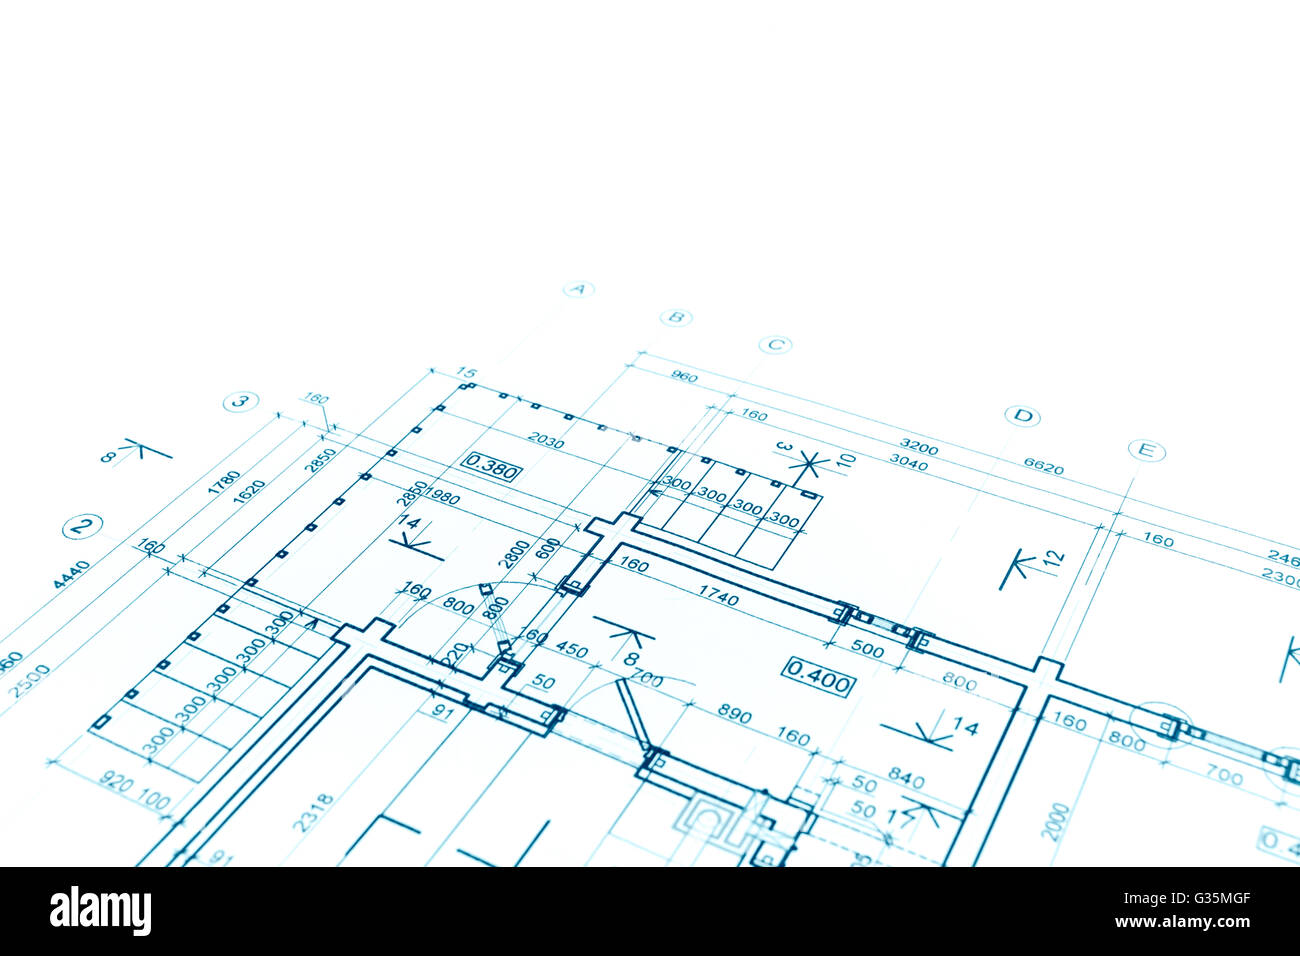 architectural background with floor plan blueprint technical drawing Stock Photo